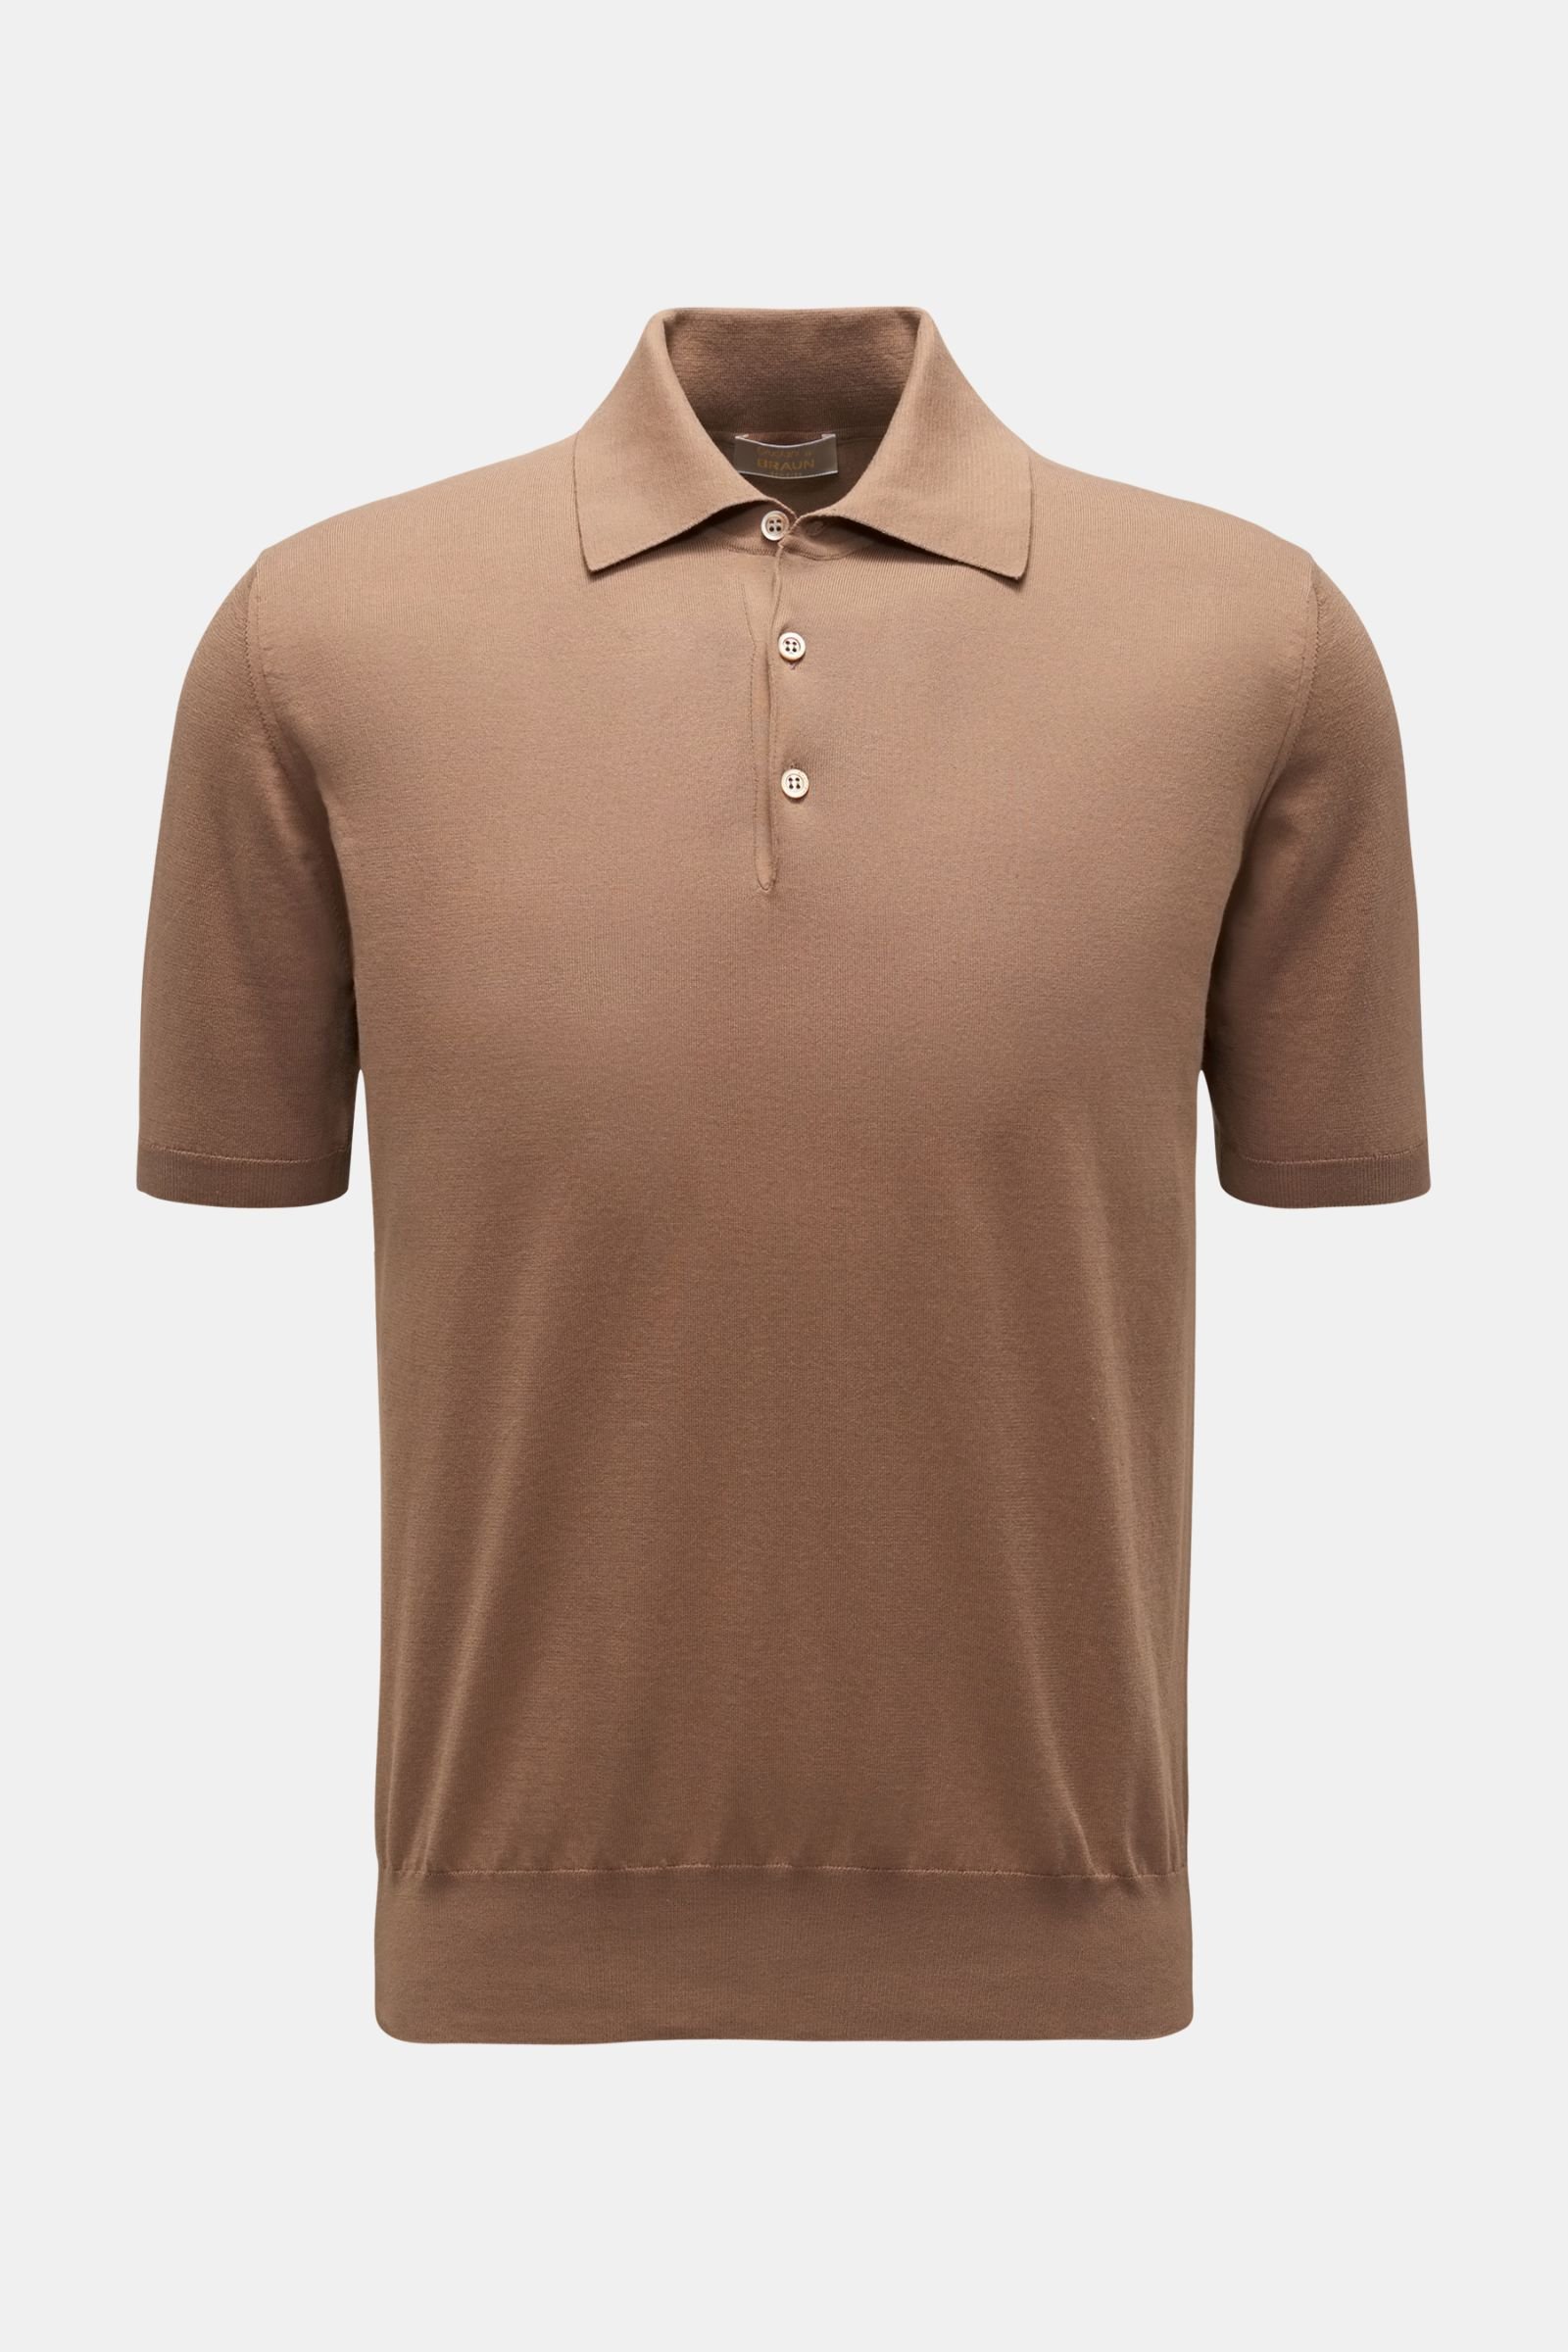 Short sleeve knit polo grey-brown